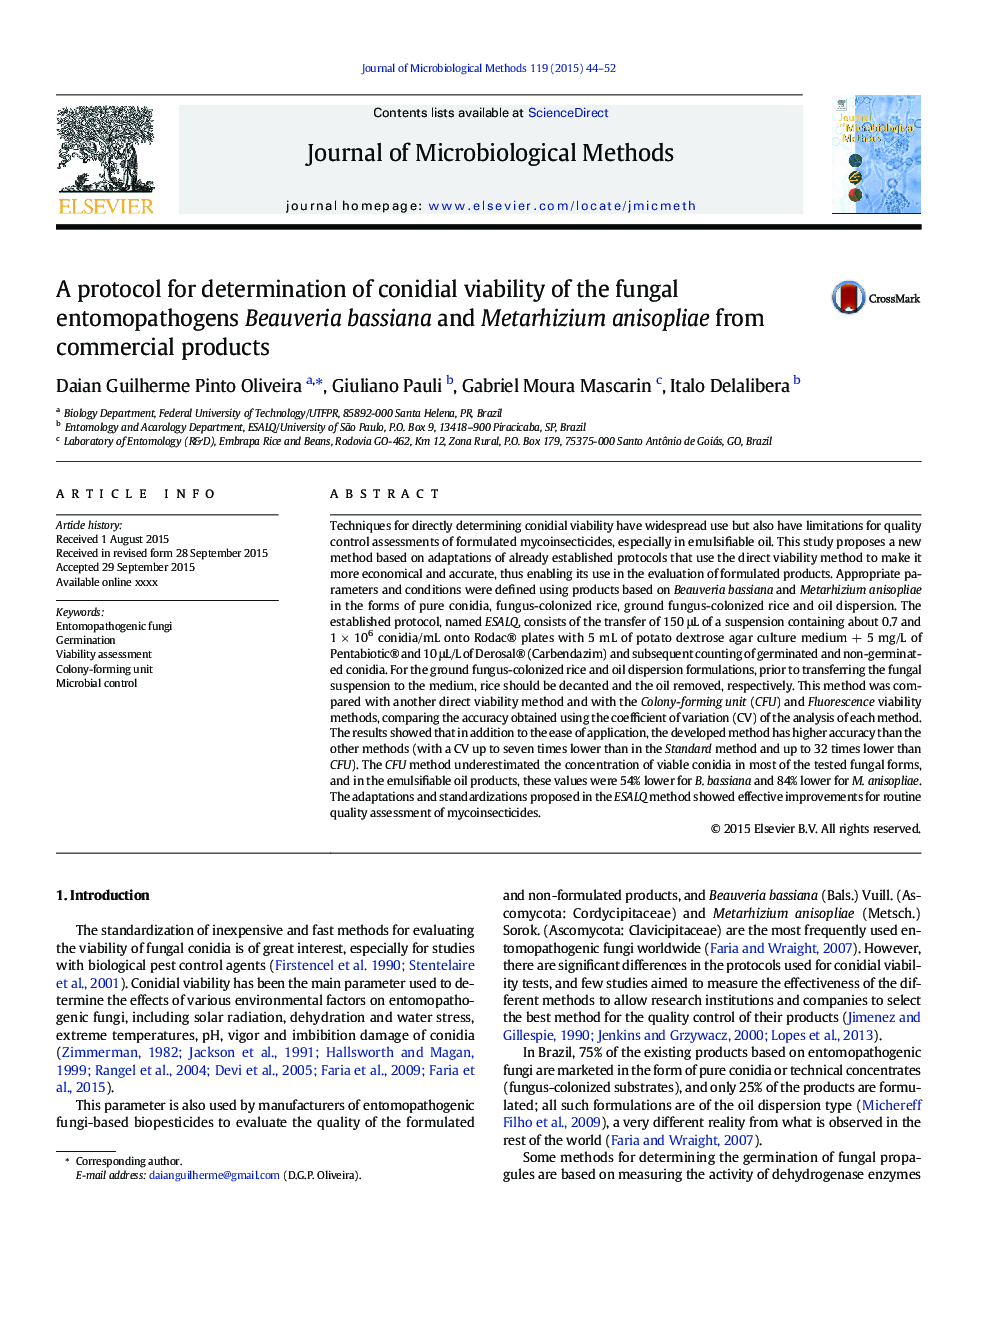 A protocol for determination of conidial viability of the fungal entomopathogens Beauveria bassiana and Metarhizium anisopliae from commercial products